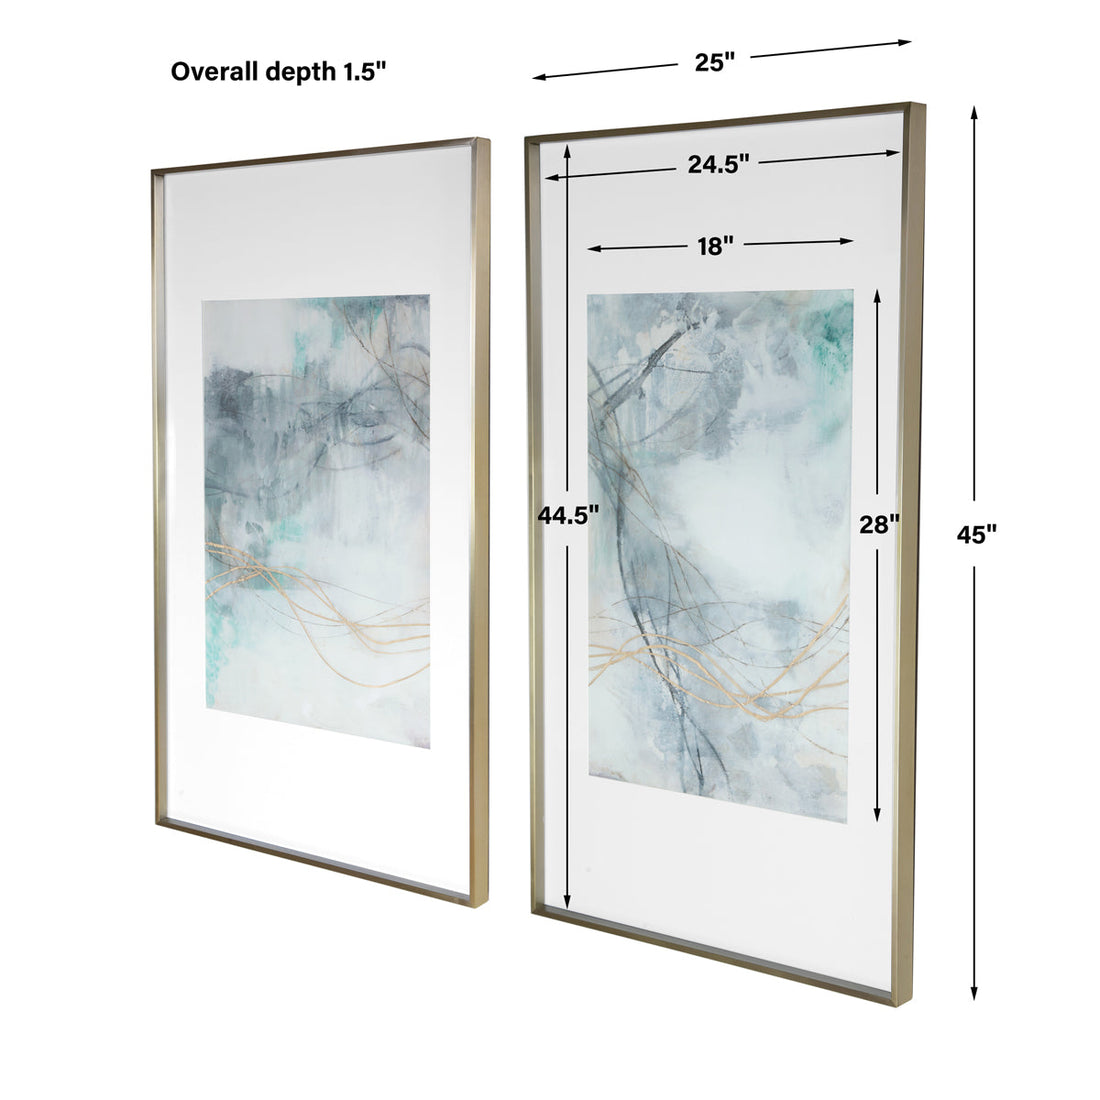 Uttermost Undulating Oro Abstract Prints, Set of 2